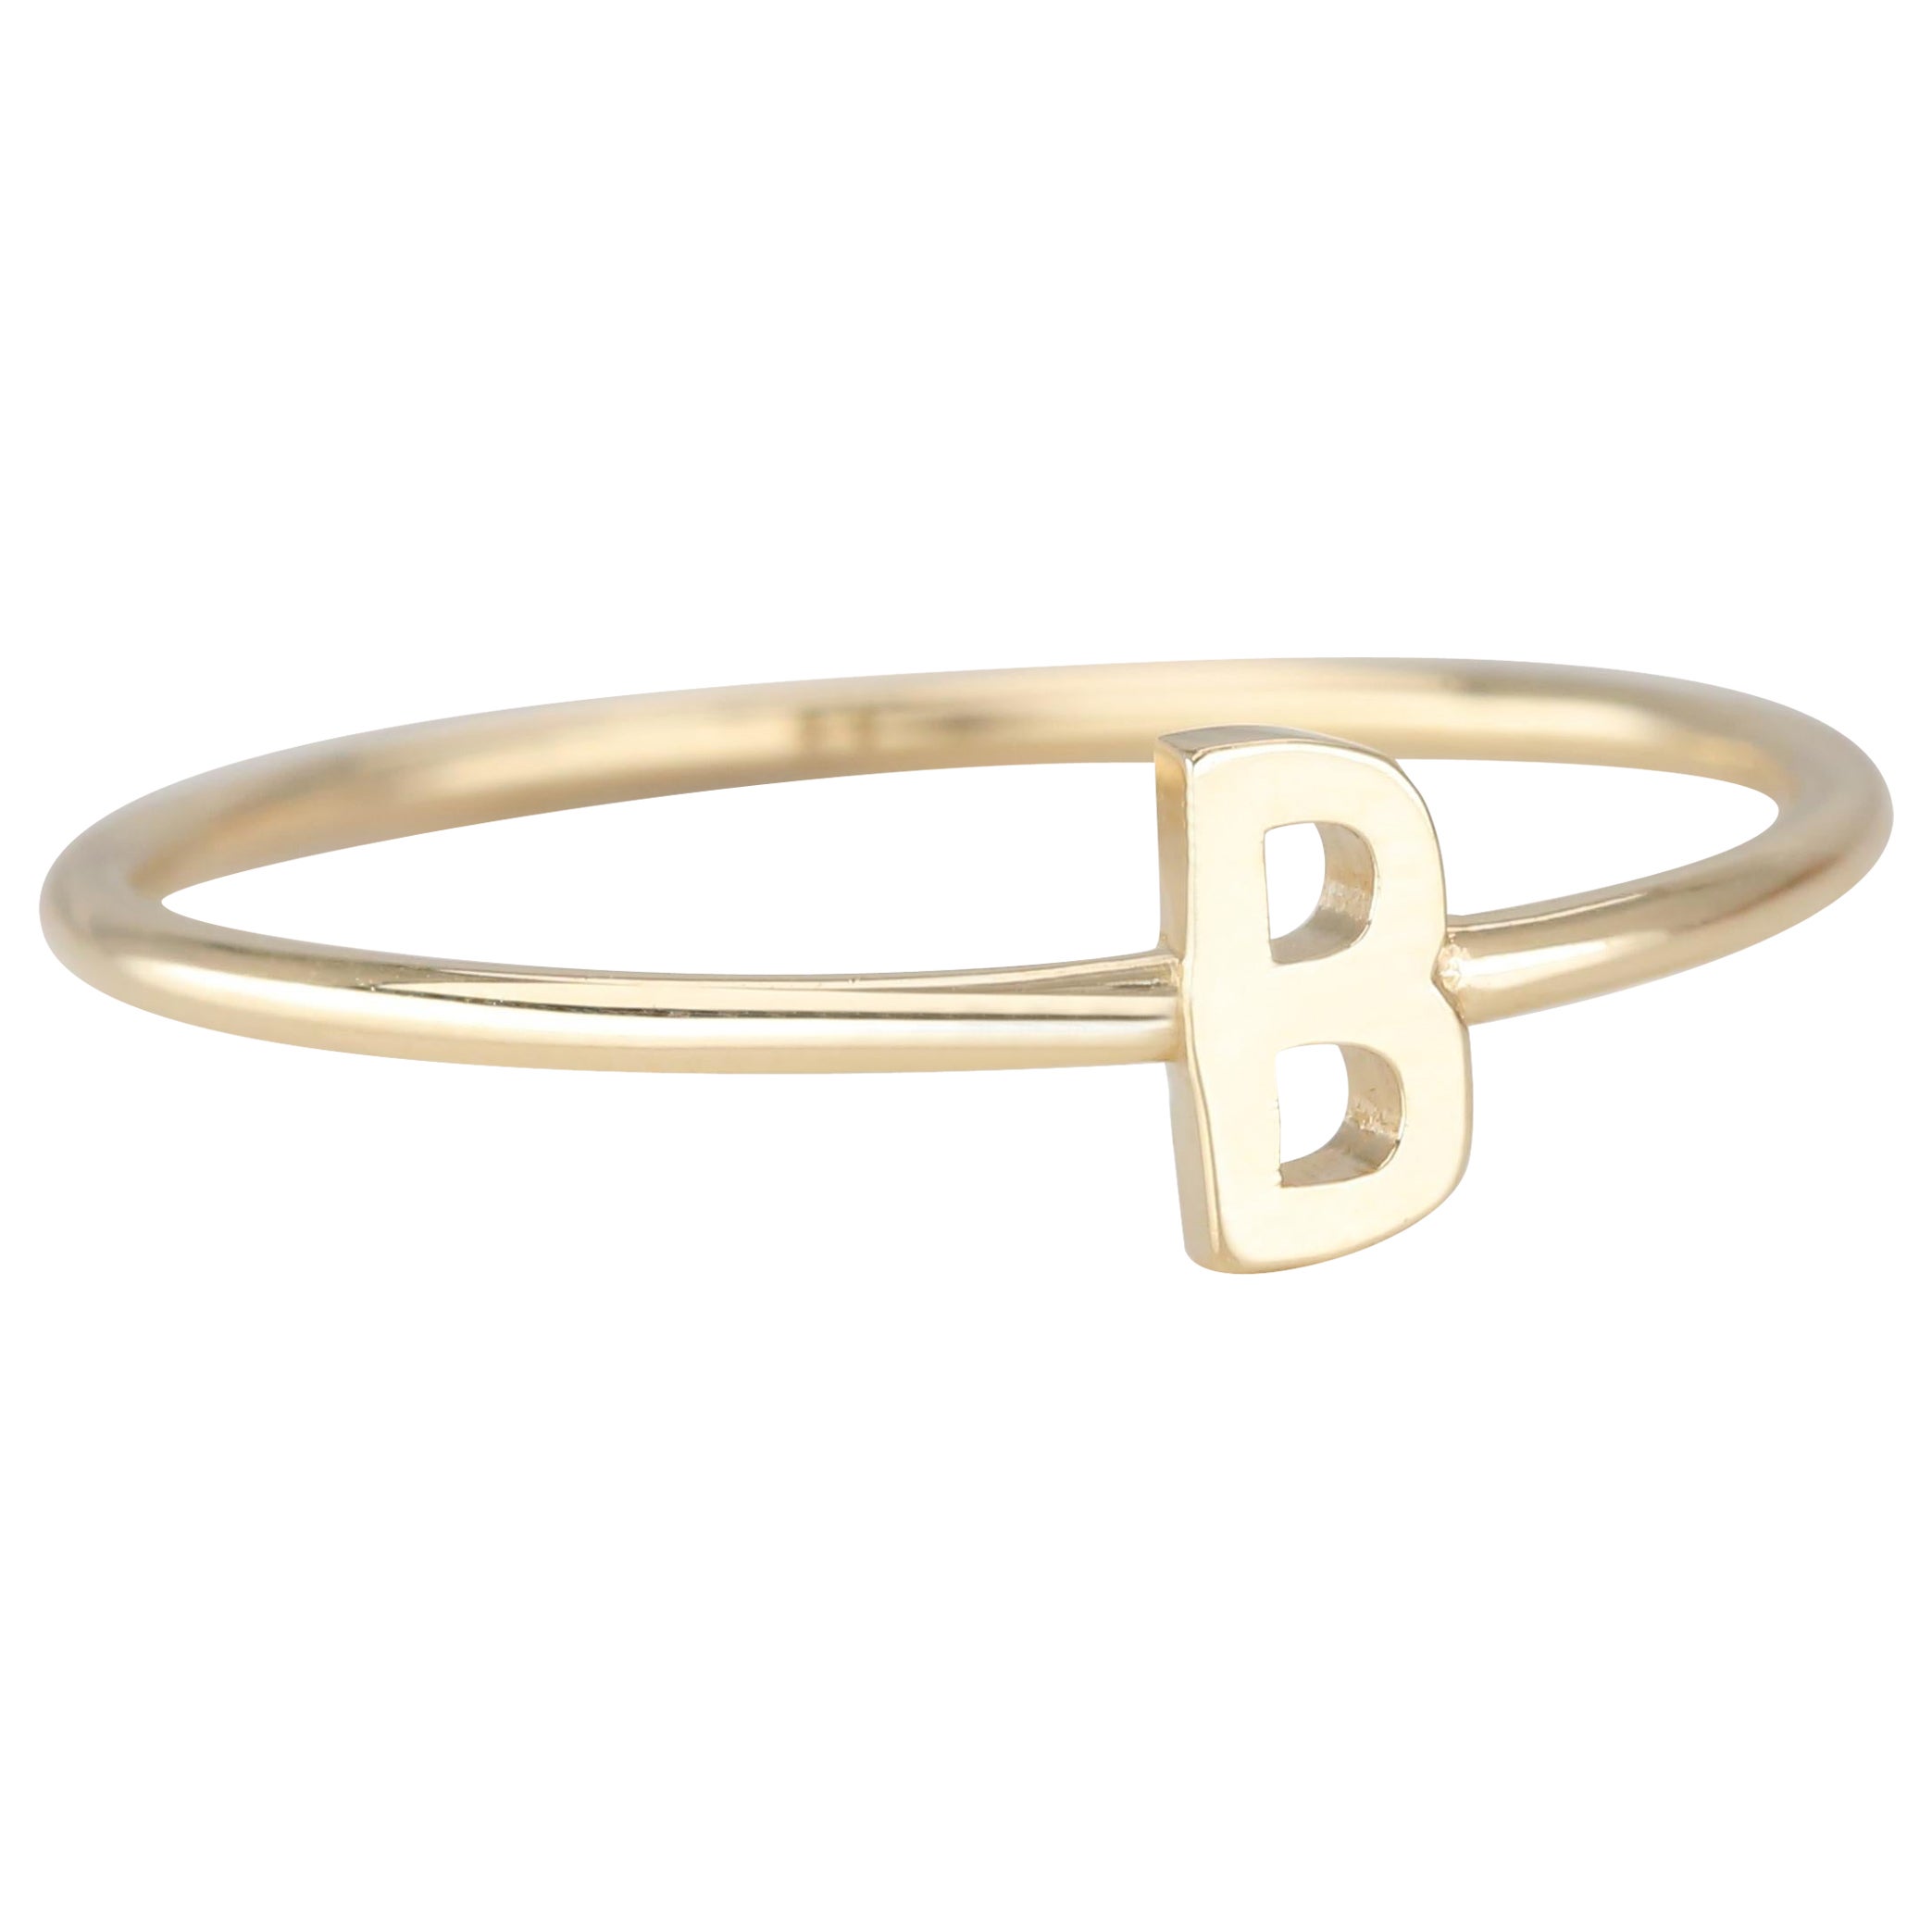 For Sale:  14K Gold Initial B Letter Ring, Personalized Initial Letter Ring